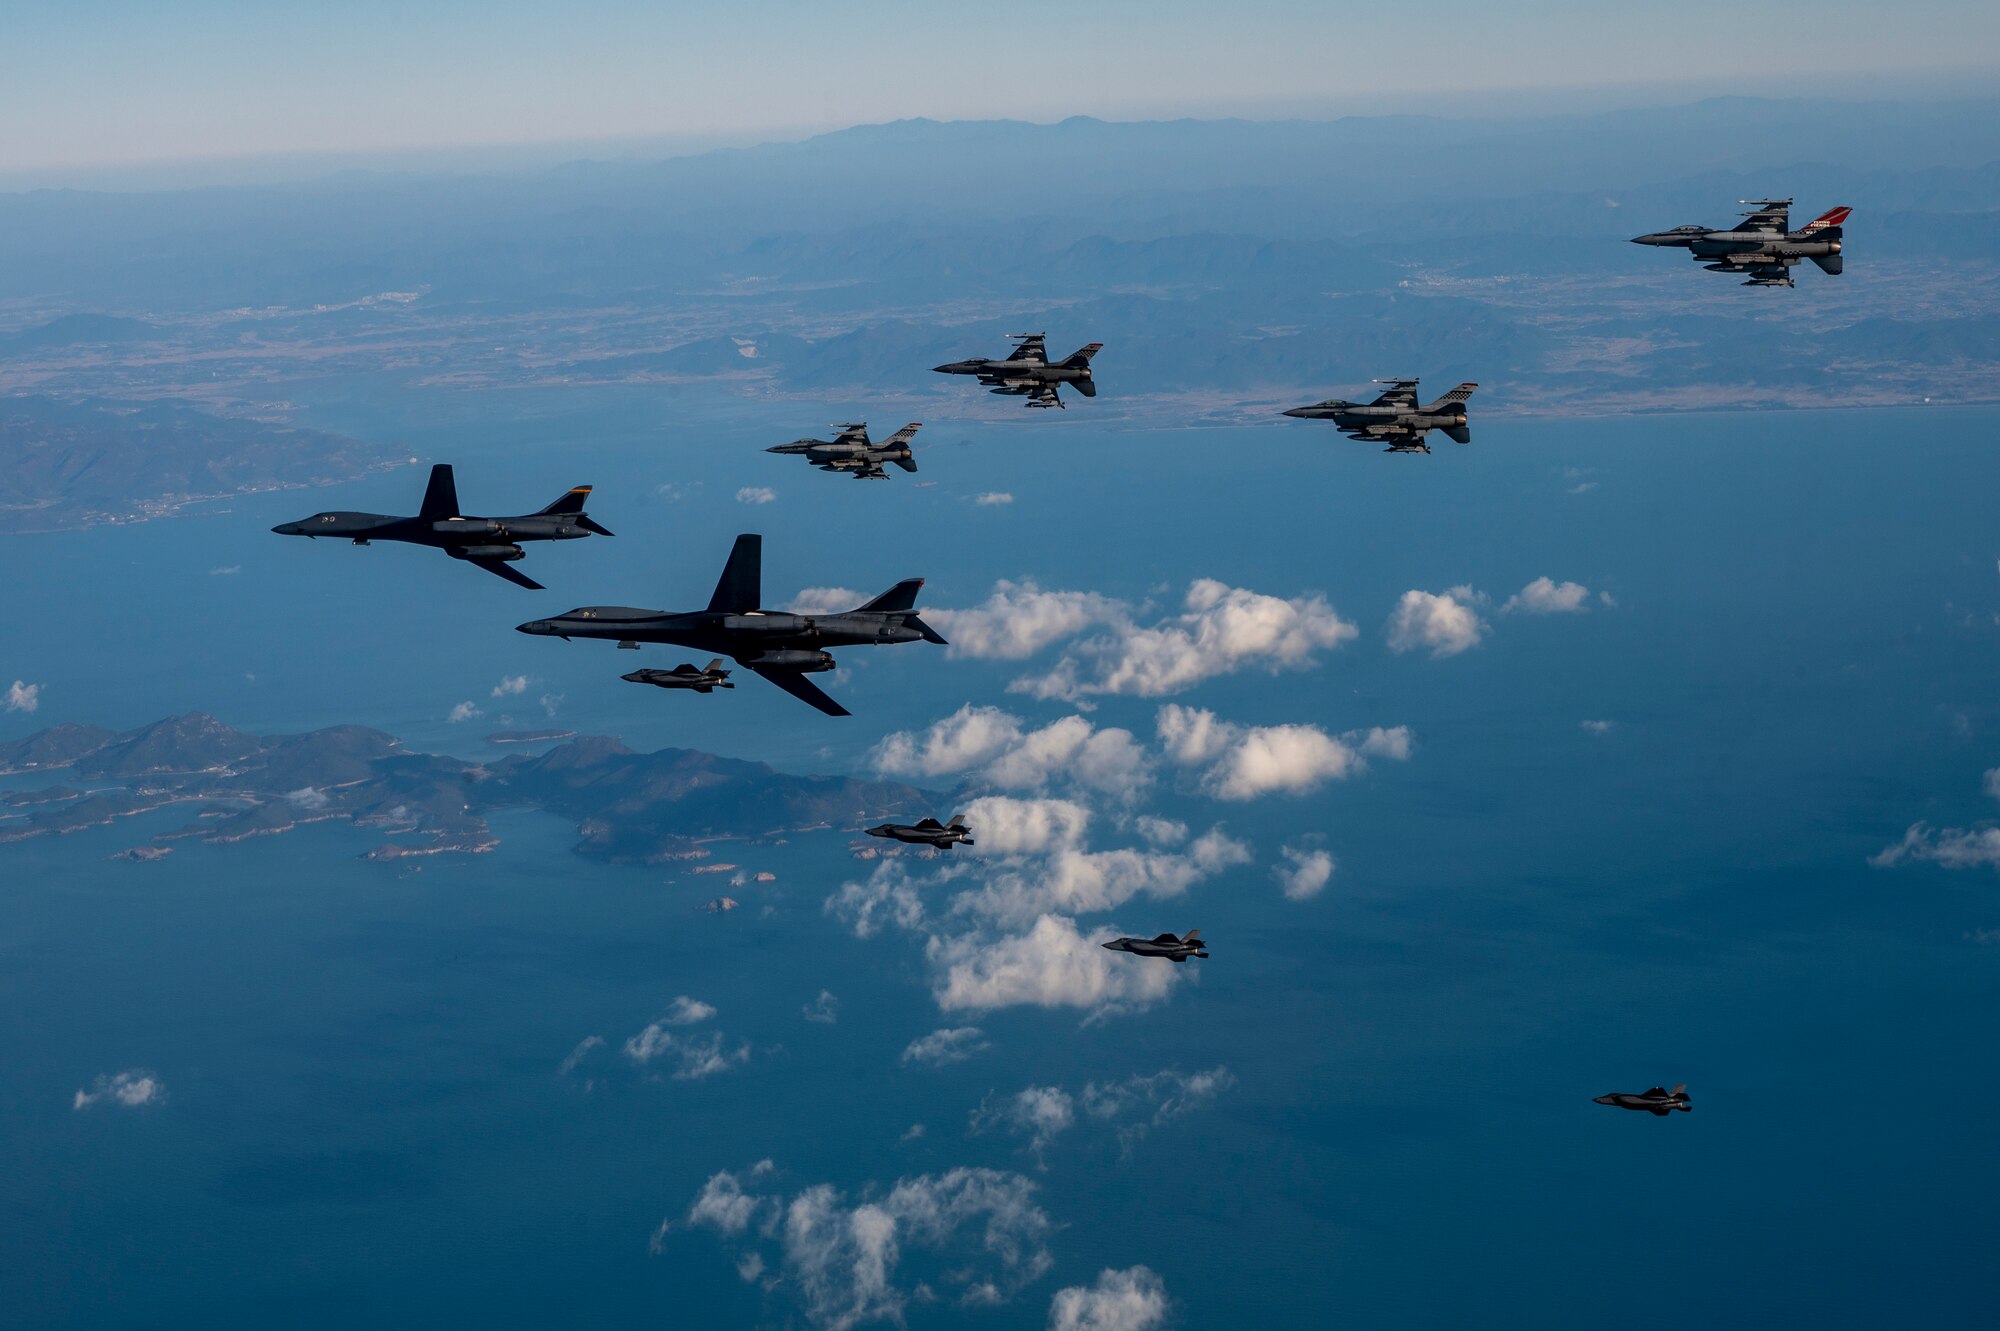 51st Fighter Wing’s F-16’s joined with Indo-Pacific Command B-1B bombers and Republic of Korea F-35A’s in a combined training flight over the Korean Peninsula as part of Vigilant Storm 23, Nov. 5, 2022.